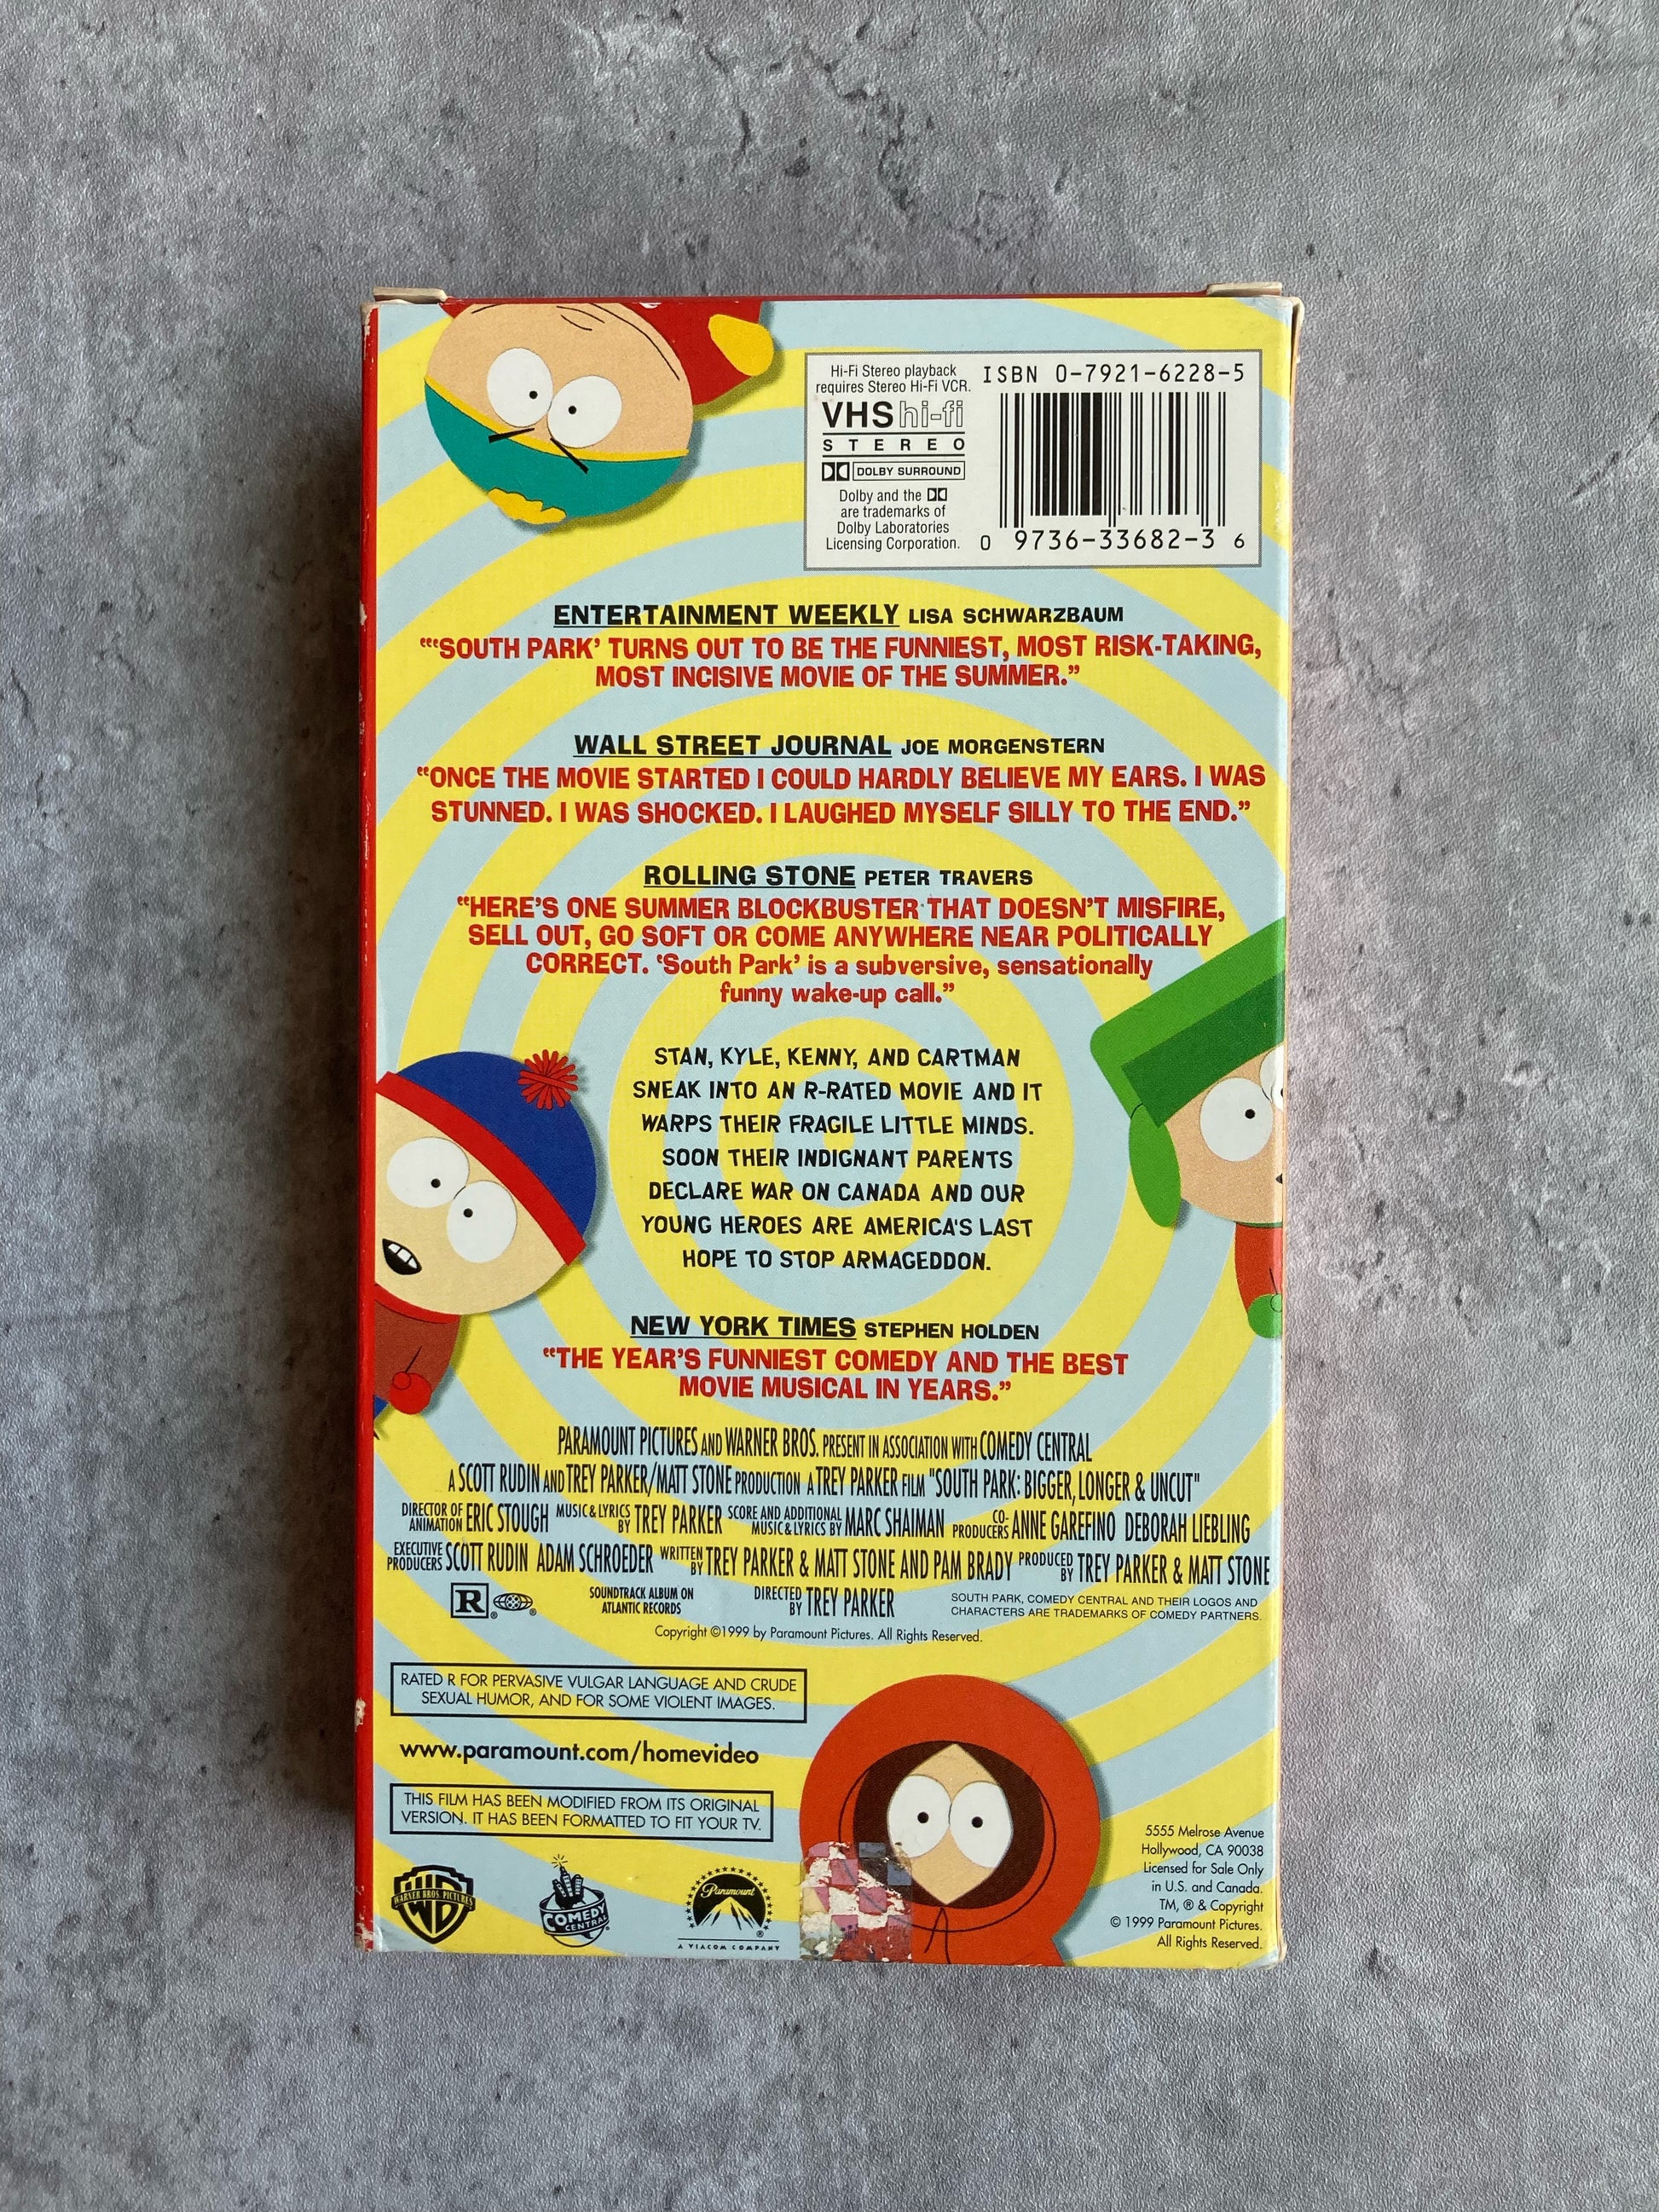 Back cover of the South Park Movie VHS. Shop for VHS and books with The Stone Circle, the only online bookstore near you.